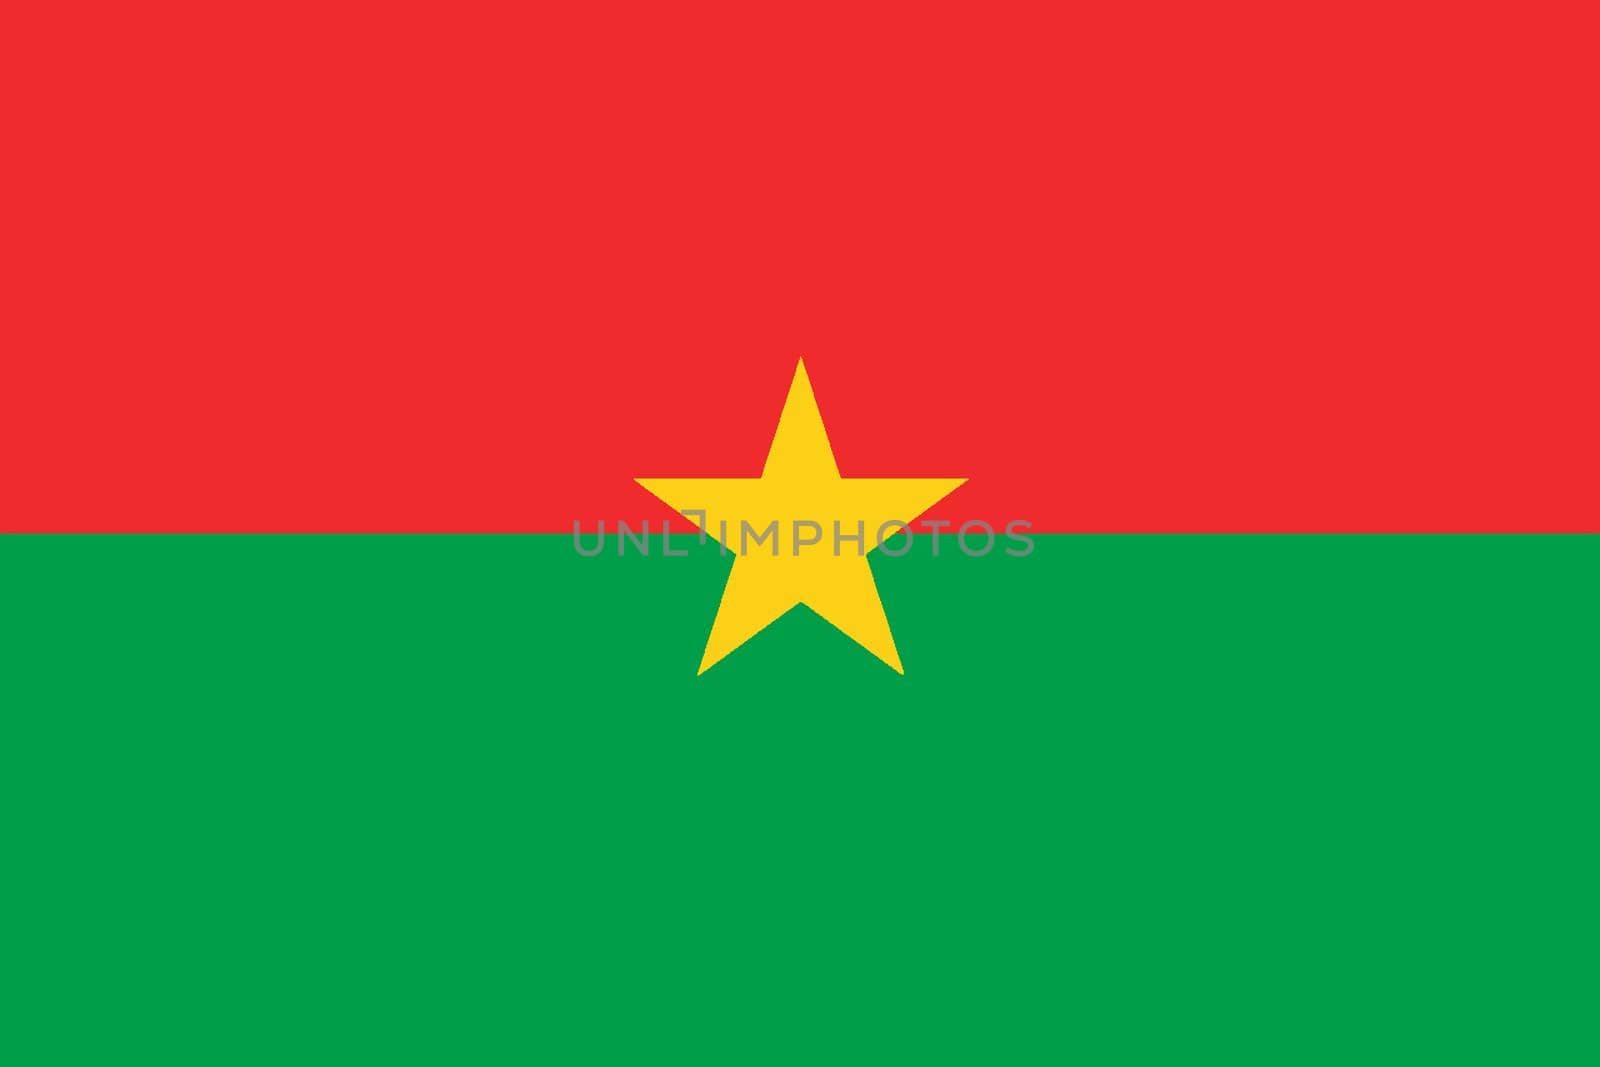 The flag of the African country of Burkina Faso